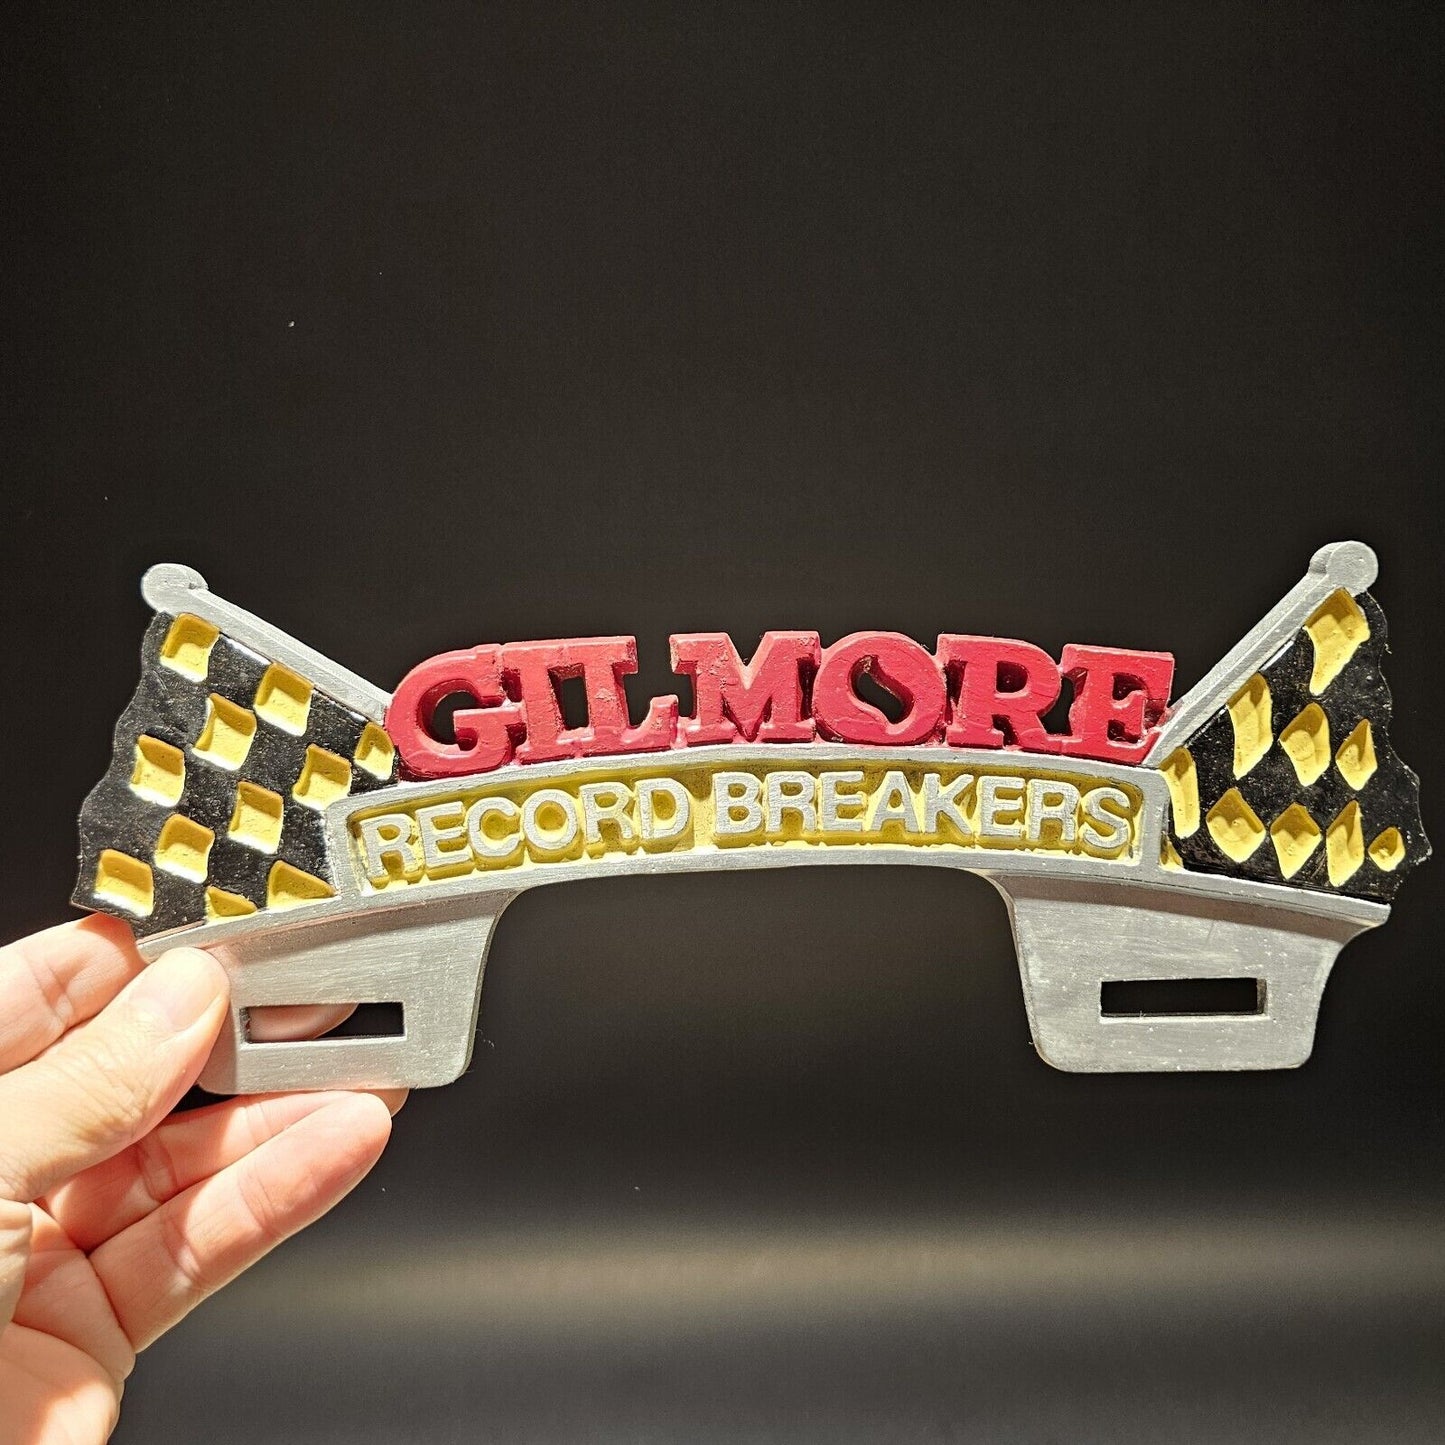 Vintage Style Aluminum Gilmore License Plate Fob Topper